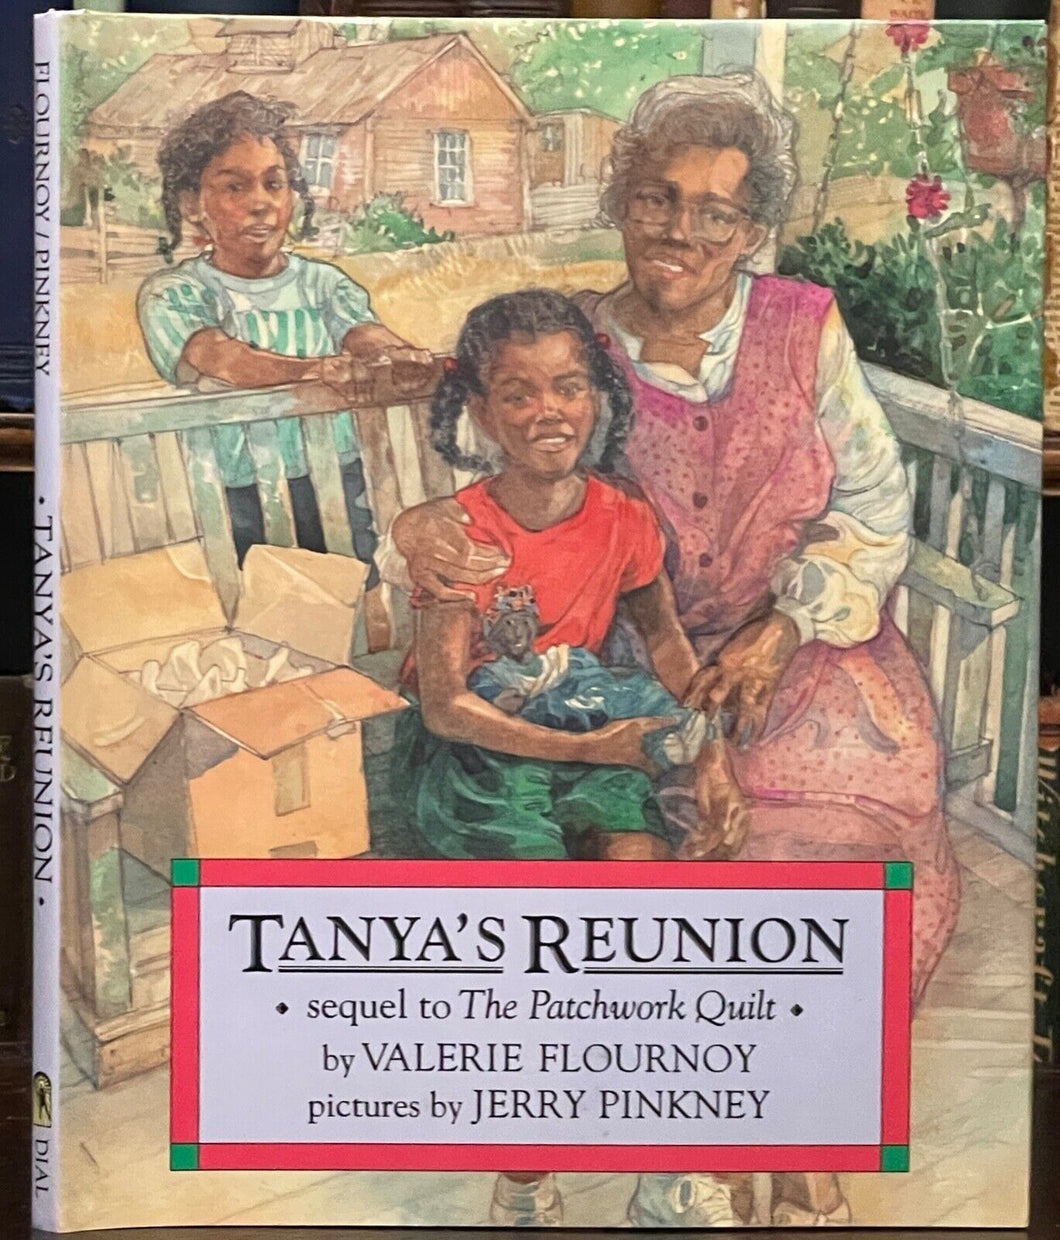 SIGNED - TANYA'S REUNION - Flournoy, 1st 1995 - AFRICAN AMERICAN CHILDREN'S